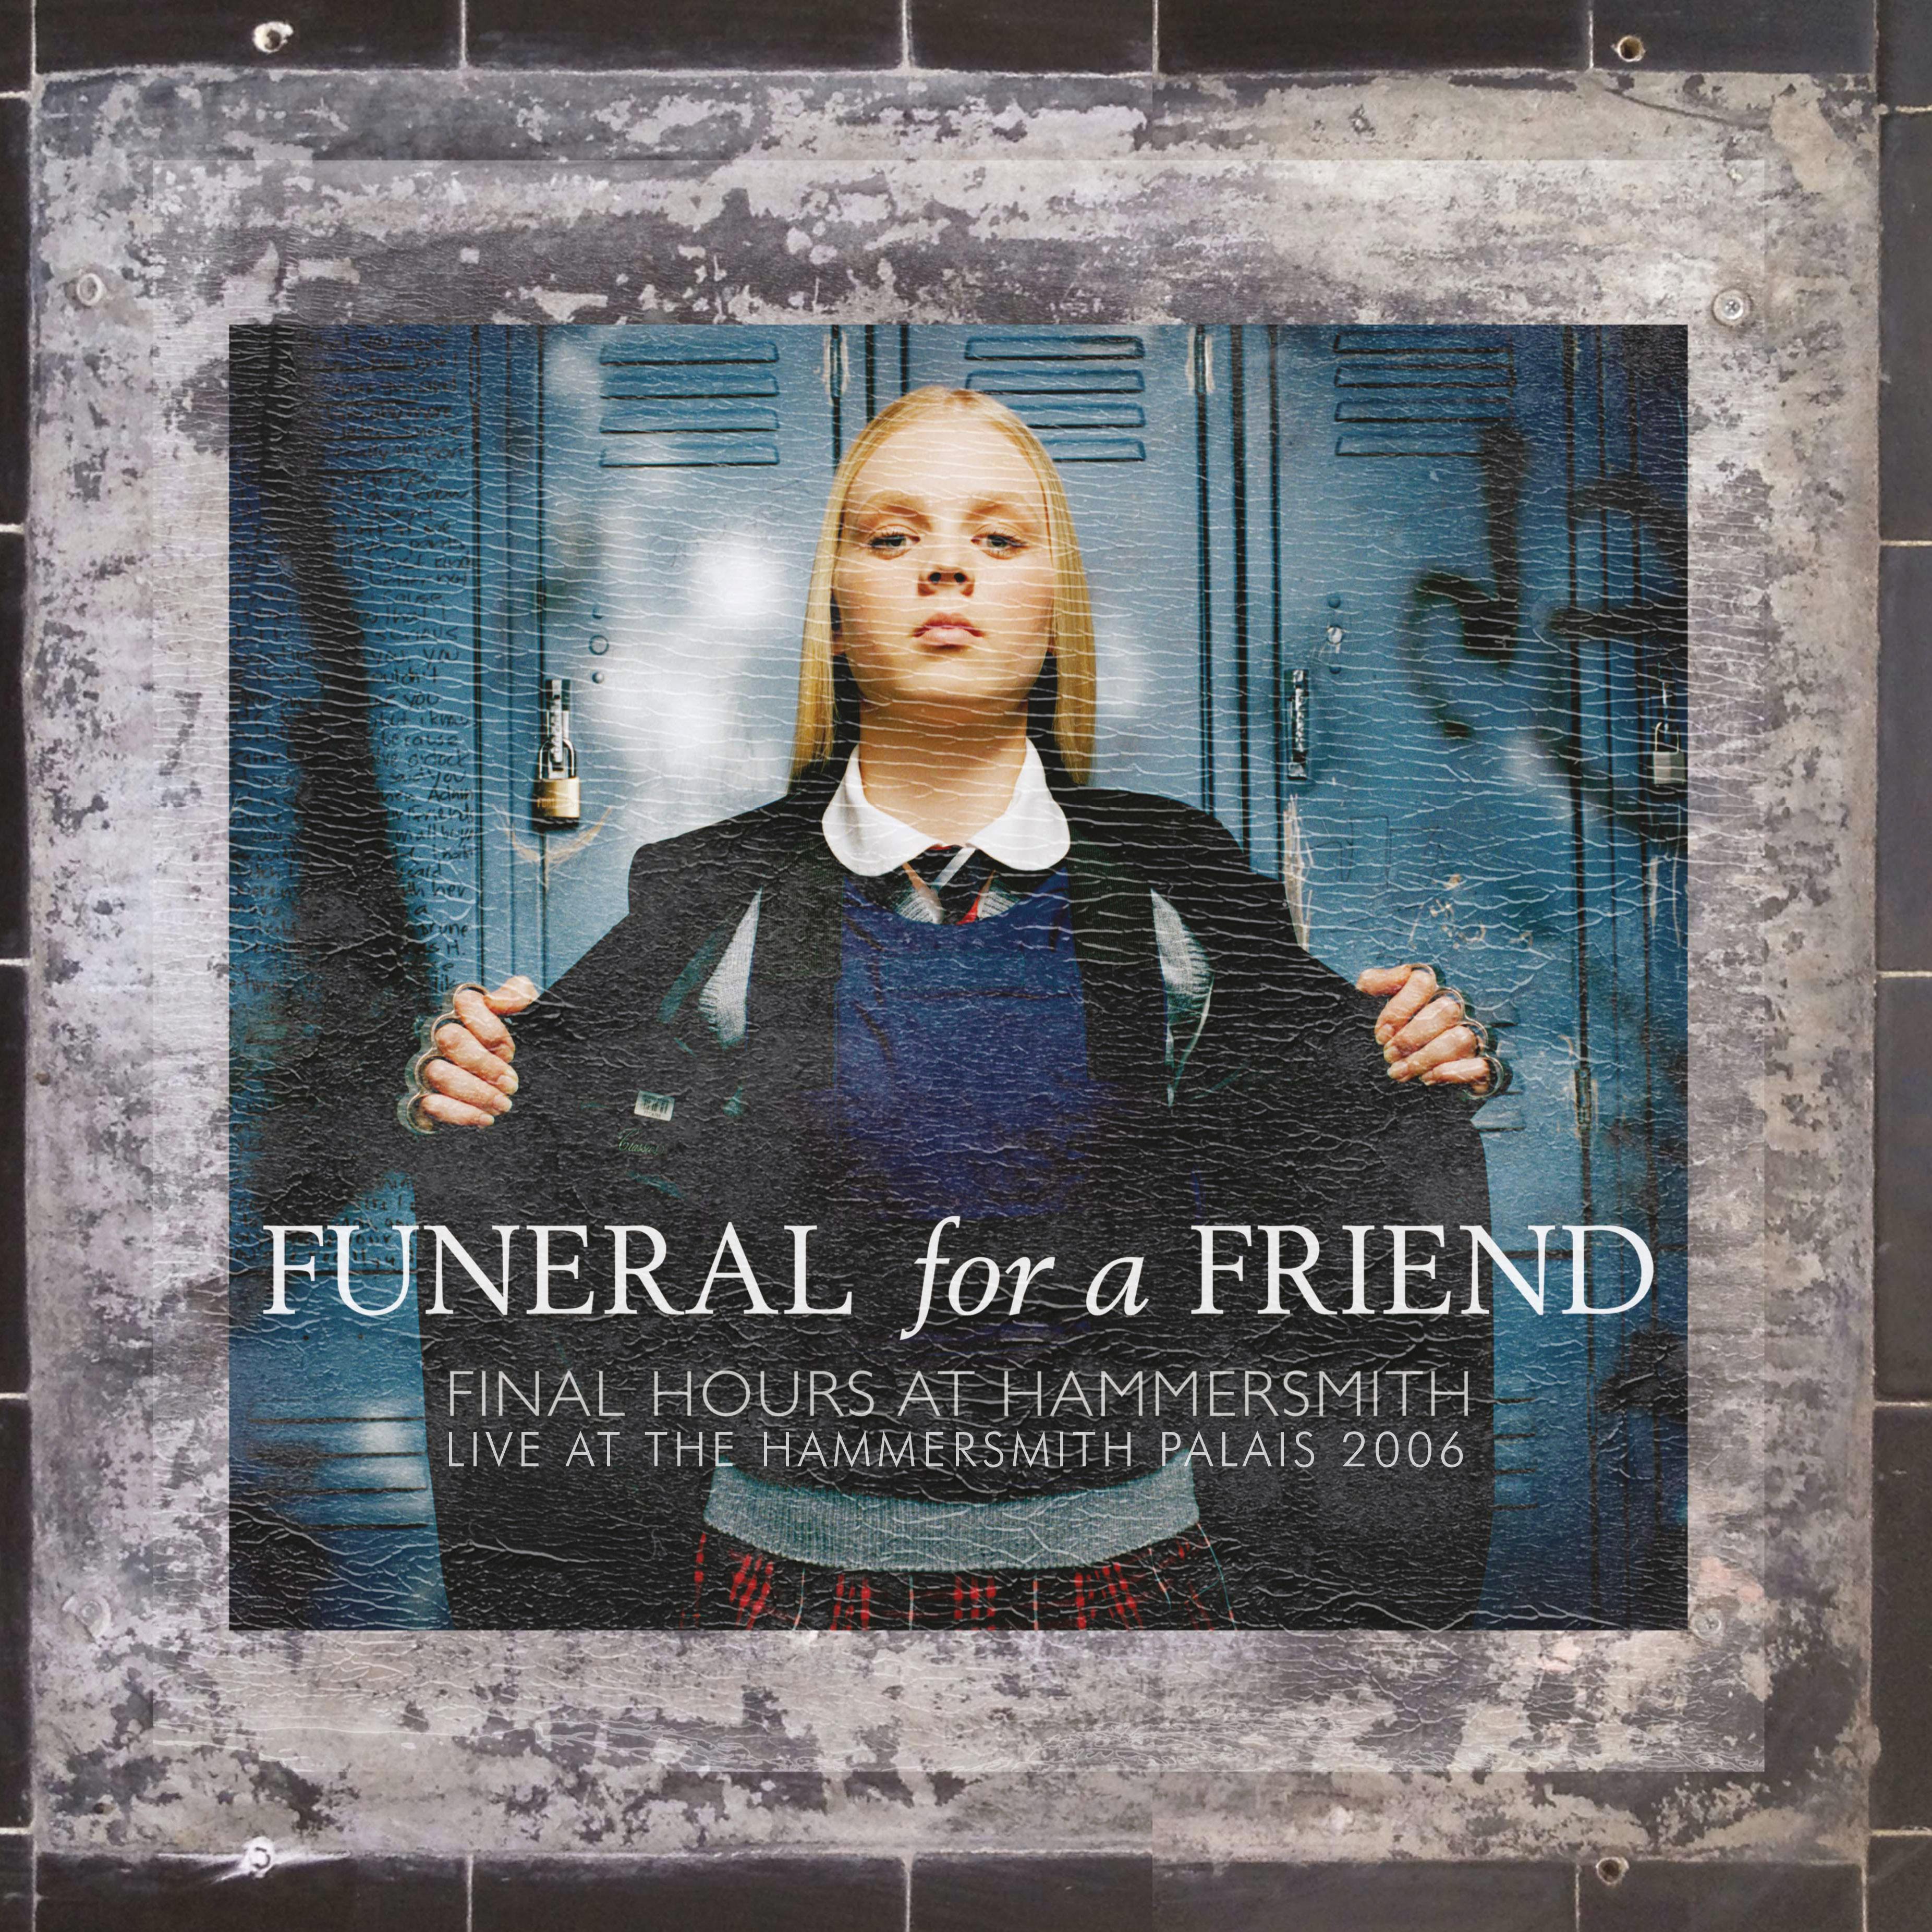 Funeral for a Friend - Recovery (Live at the Hammersmith Palais, 2006)